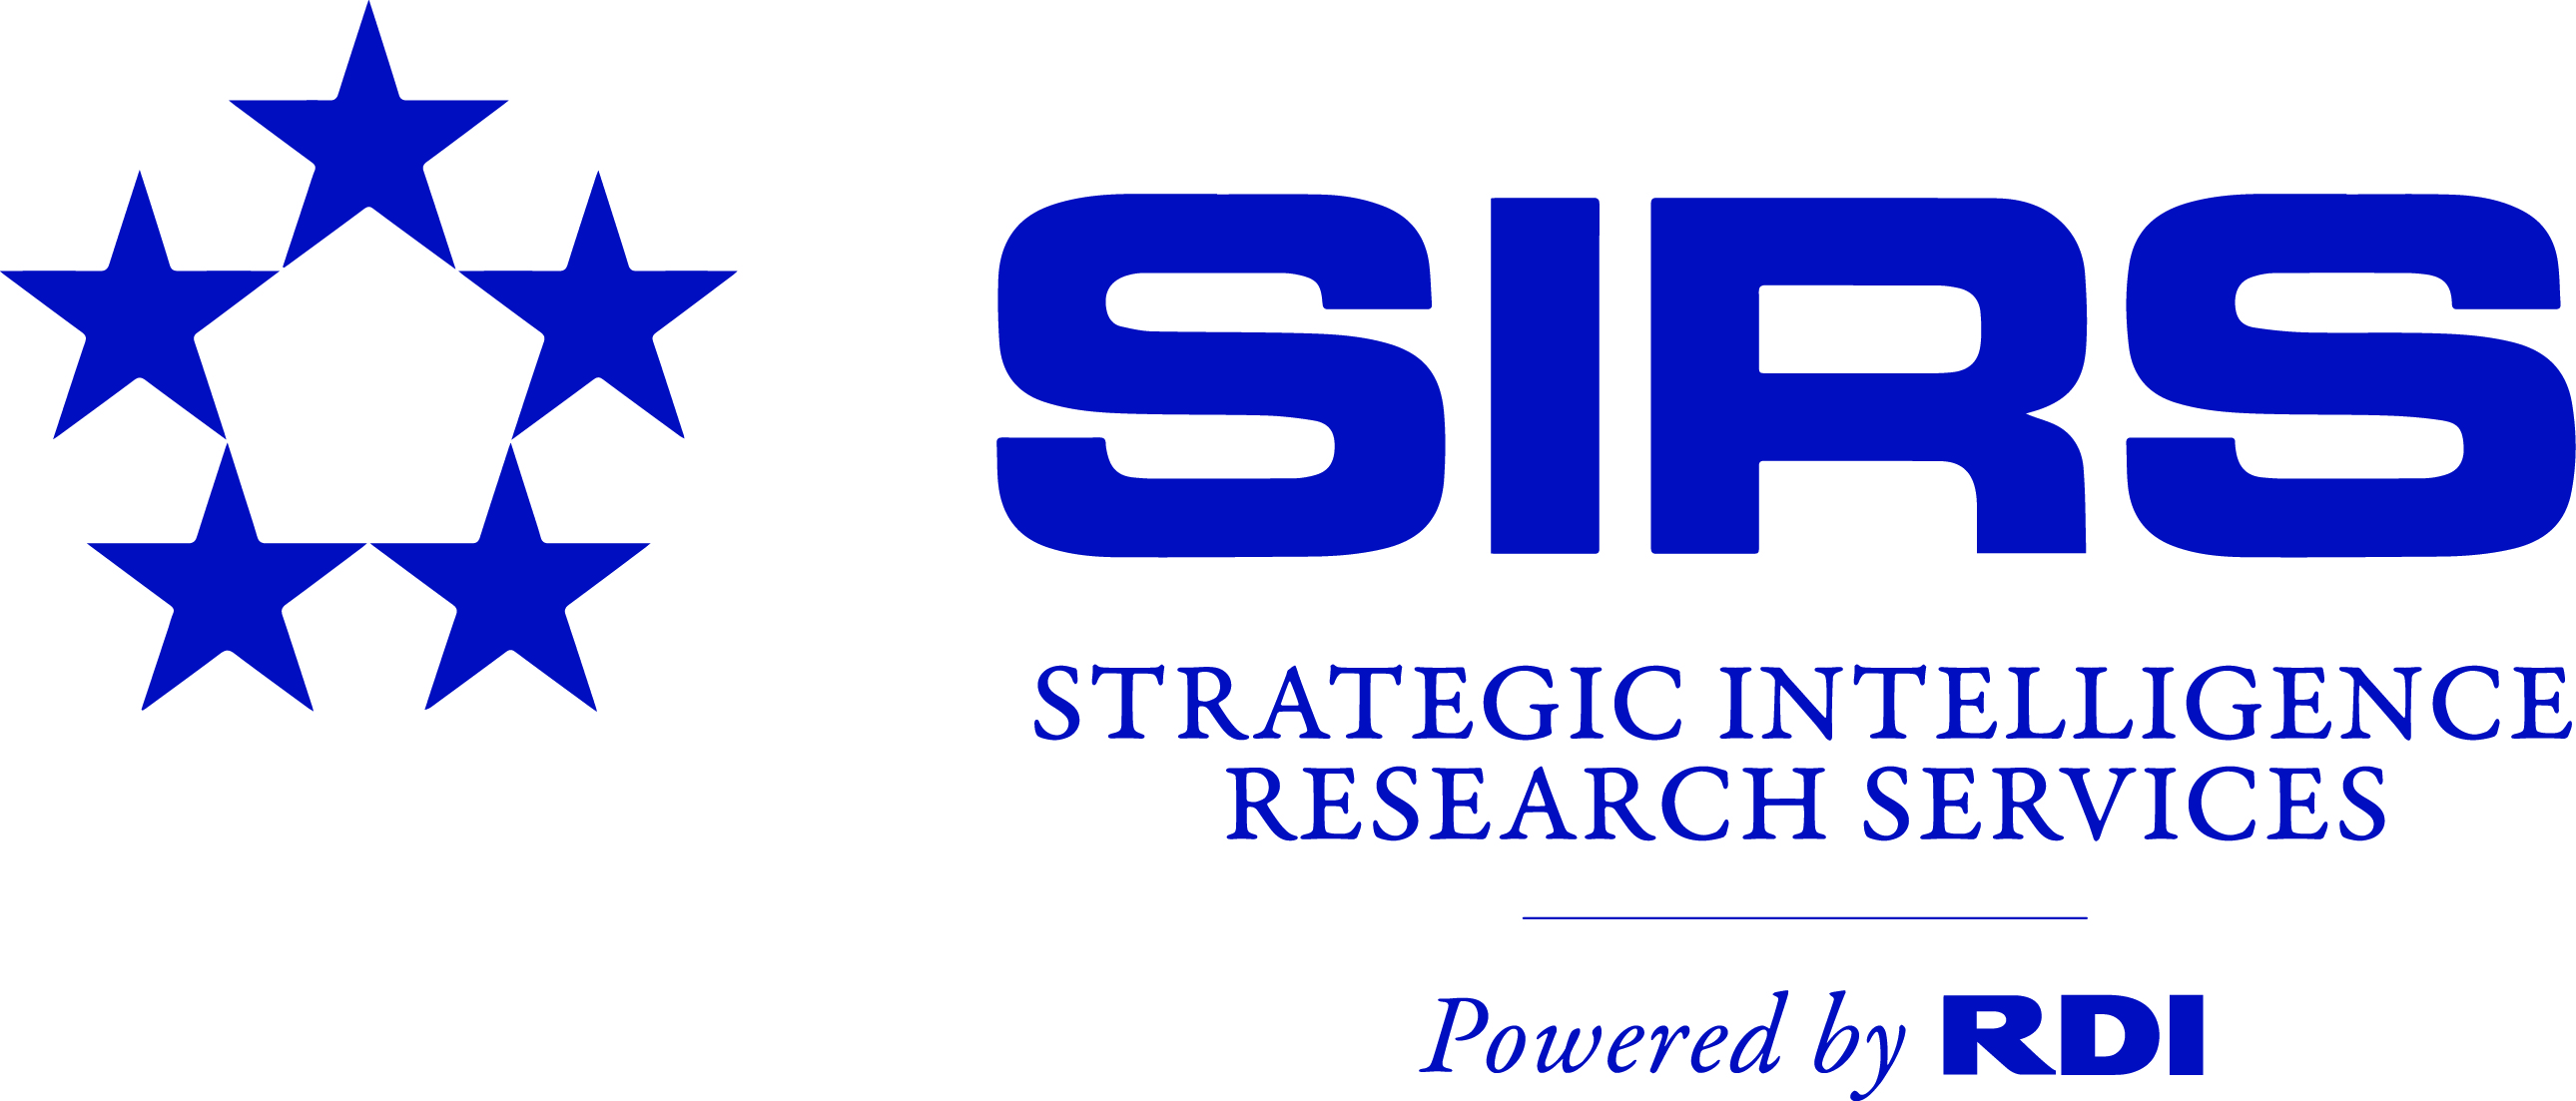 Strategic Intelligence Research Services